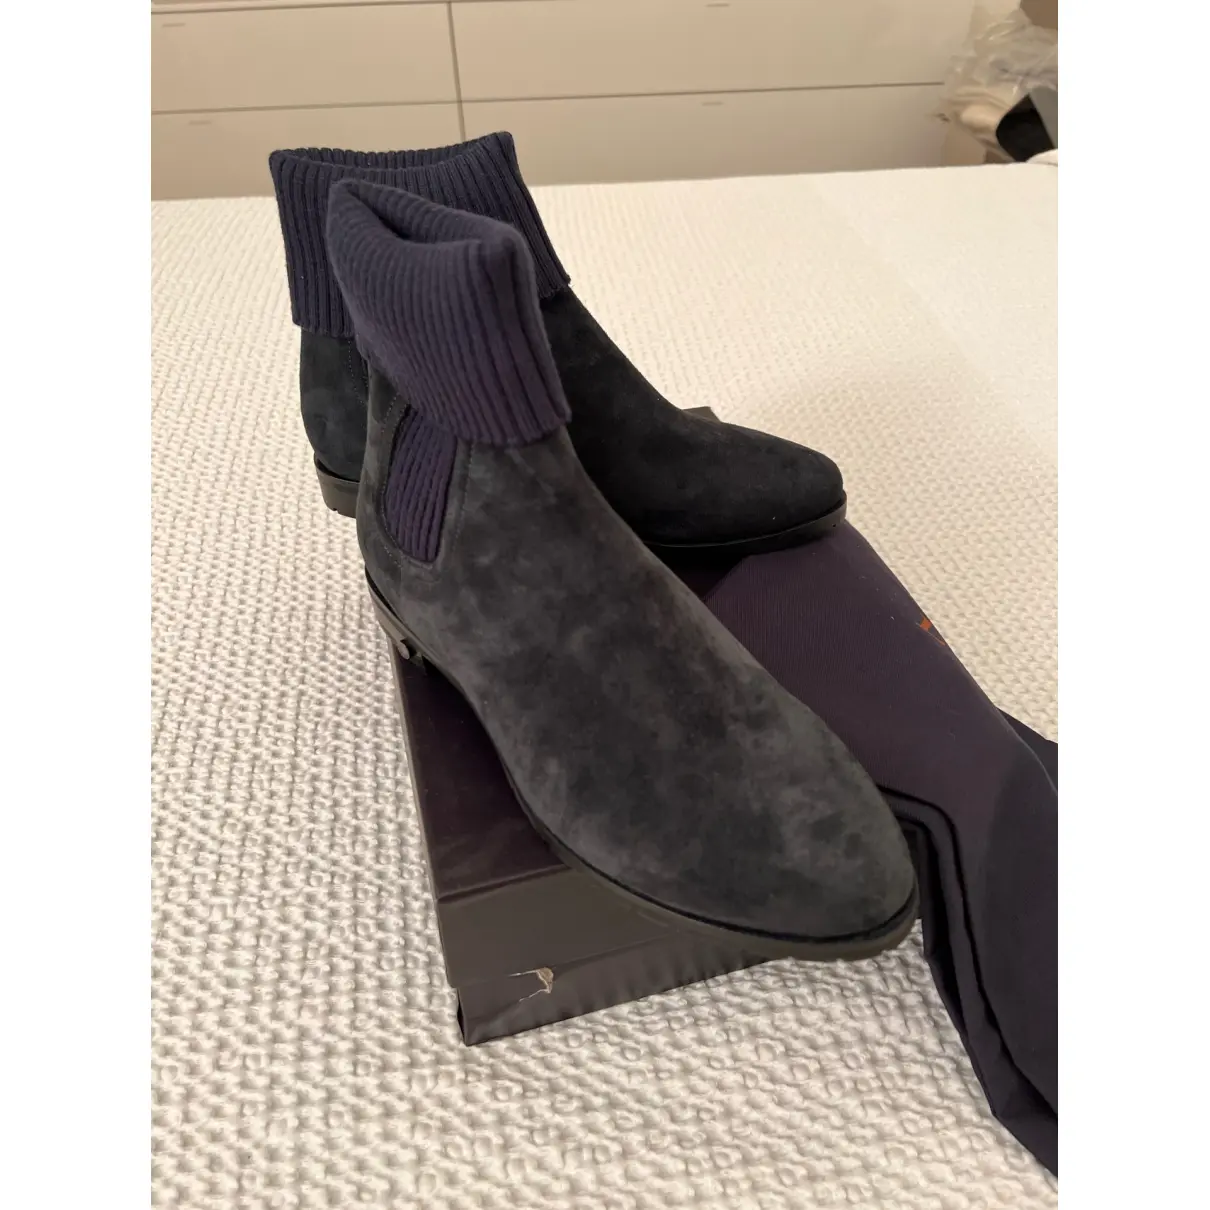 Ankle boots Le Silla